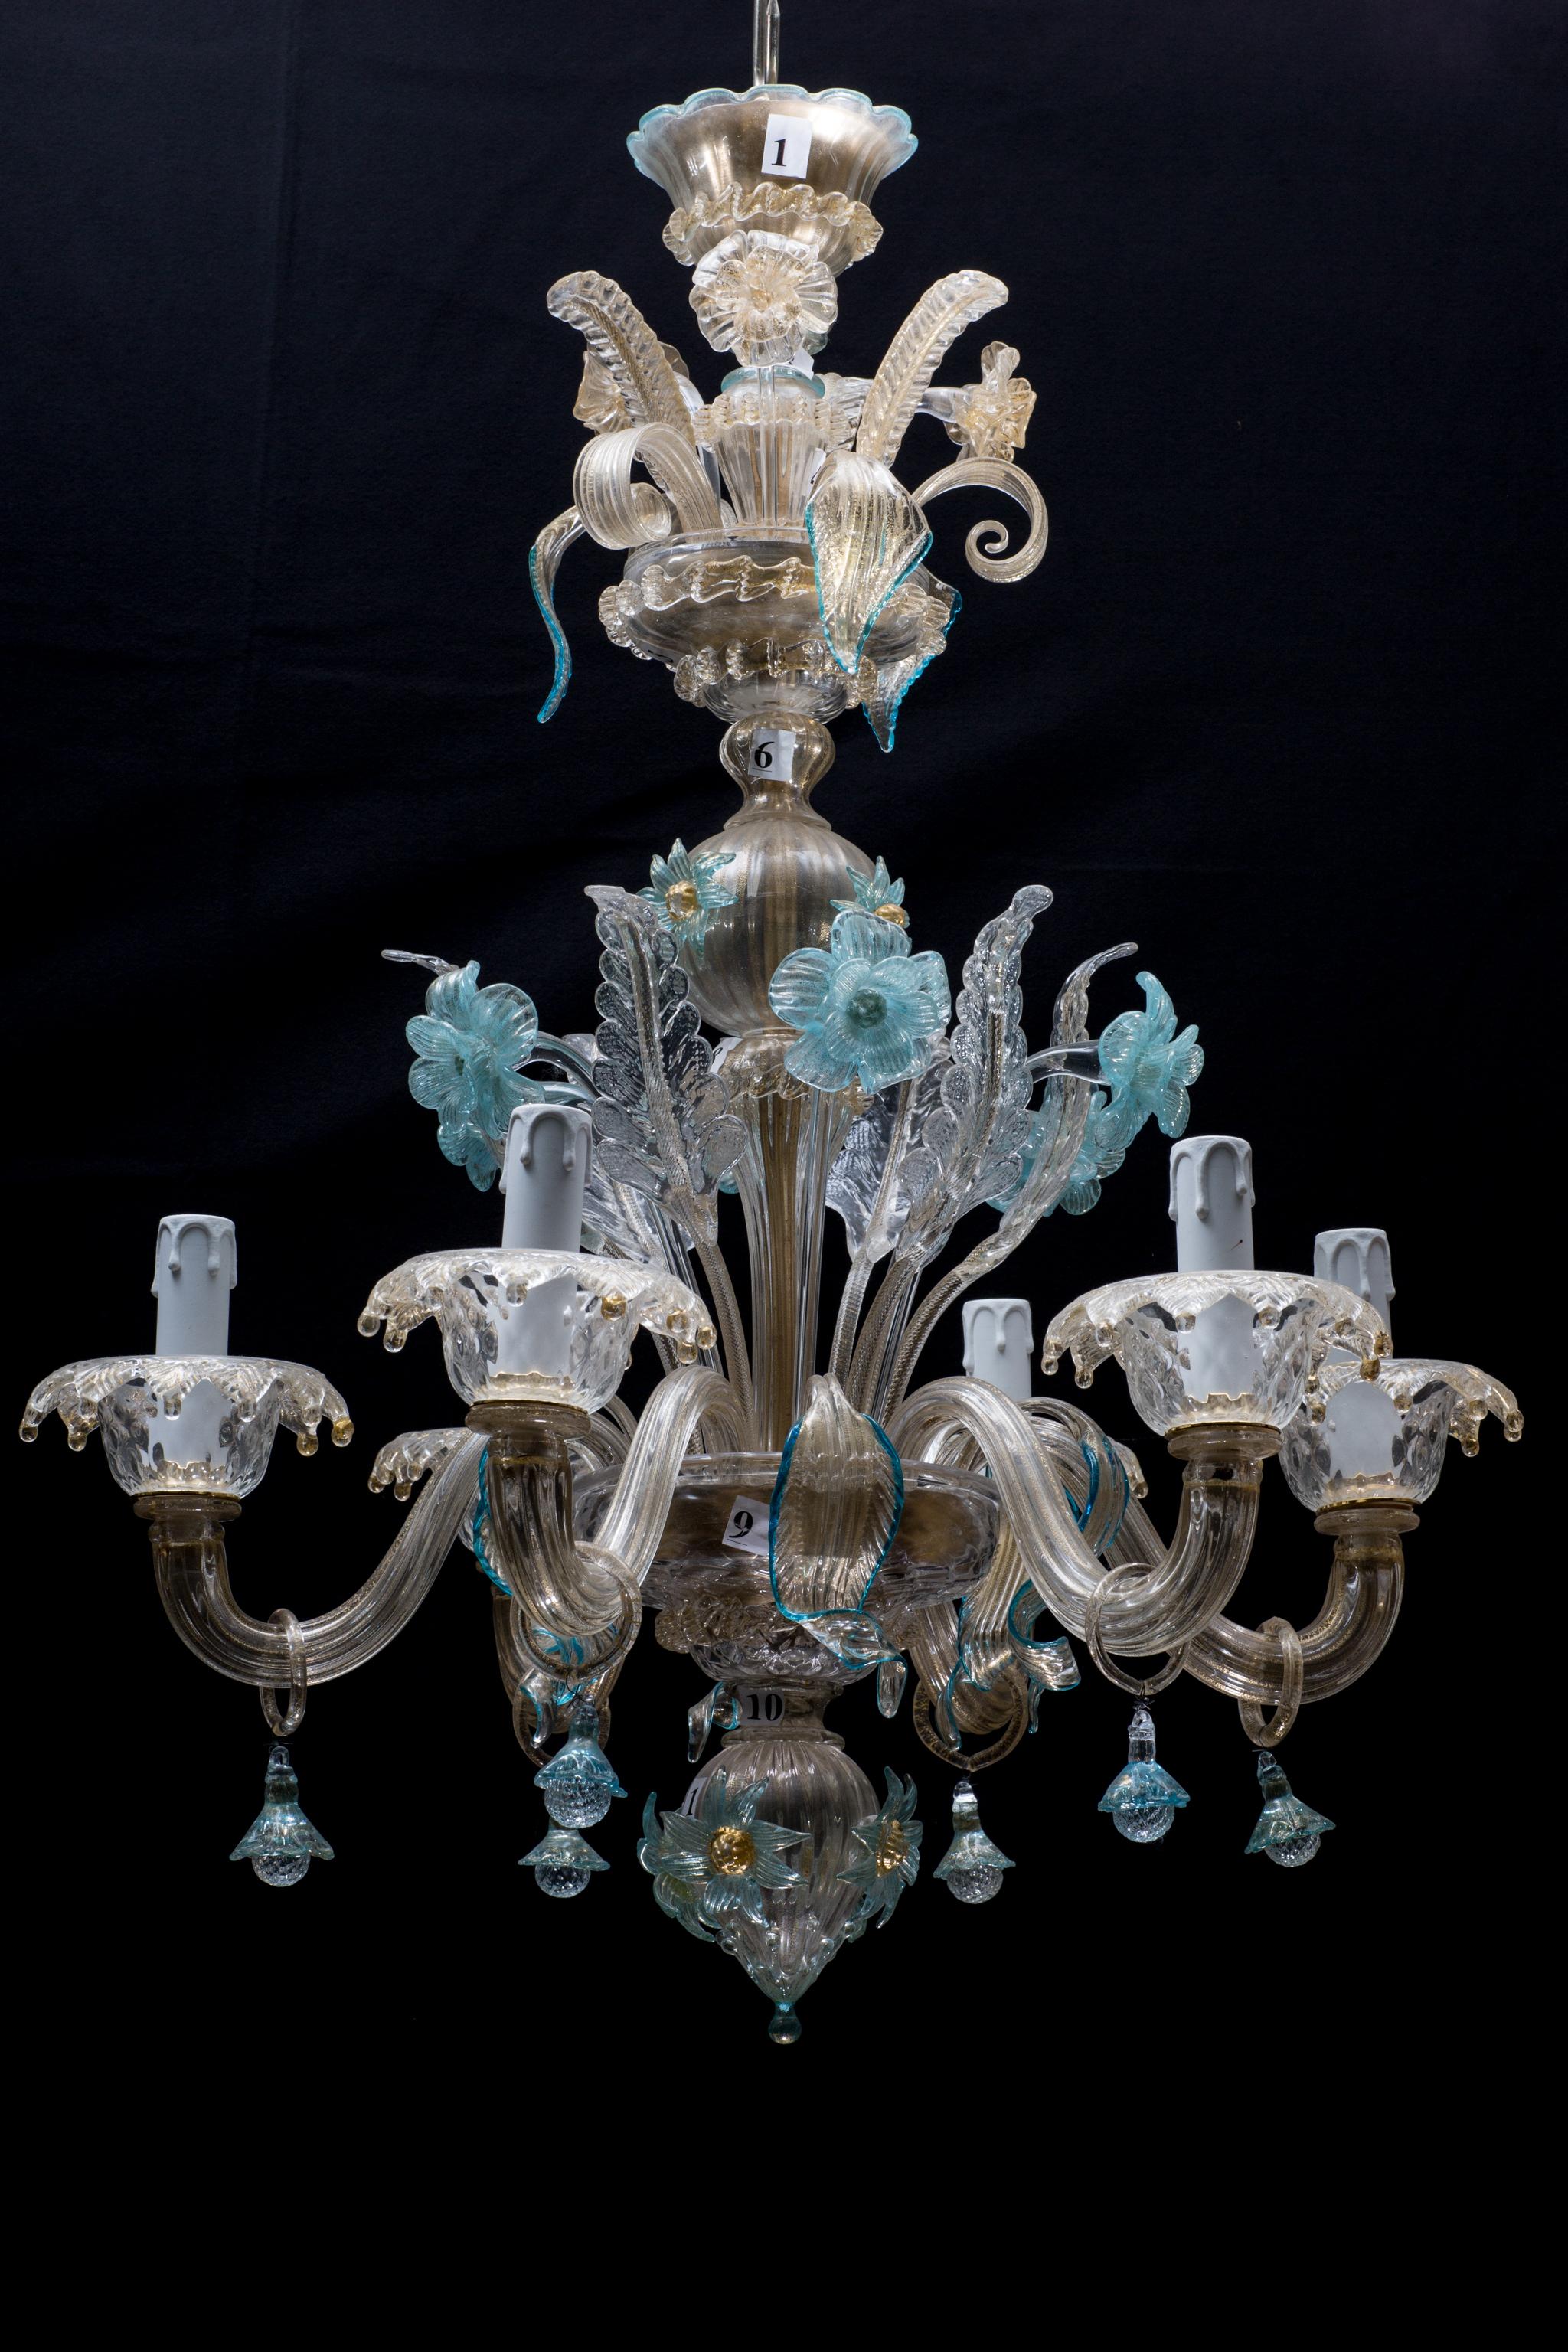 A unique midcentury Italian Murano glass chandelier from Venetia by Galliano Ferro.
The whole chandelier is embedded with 24-karat gold. This light has two levels, and because of that is also called Castelletto which translates to little castle. At